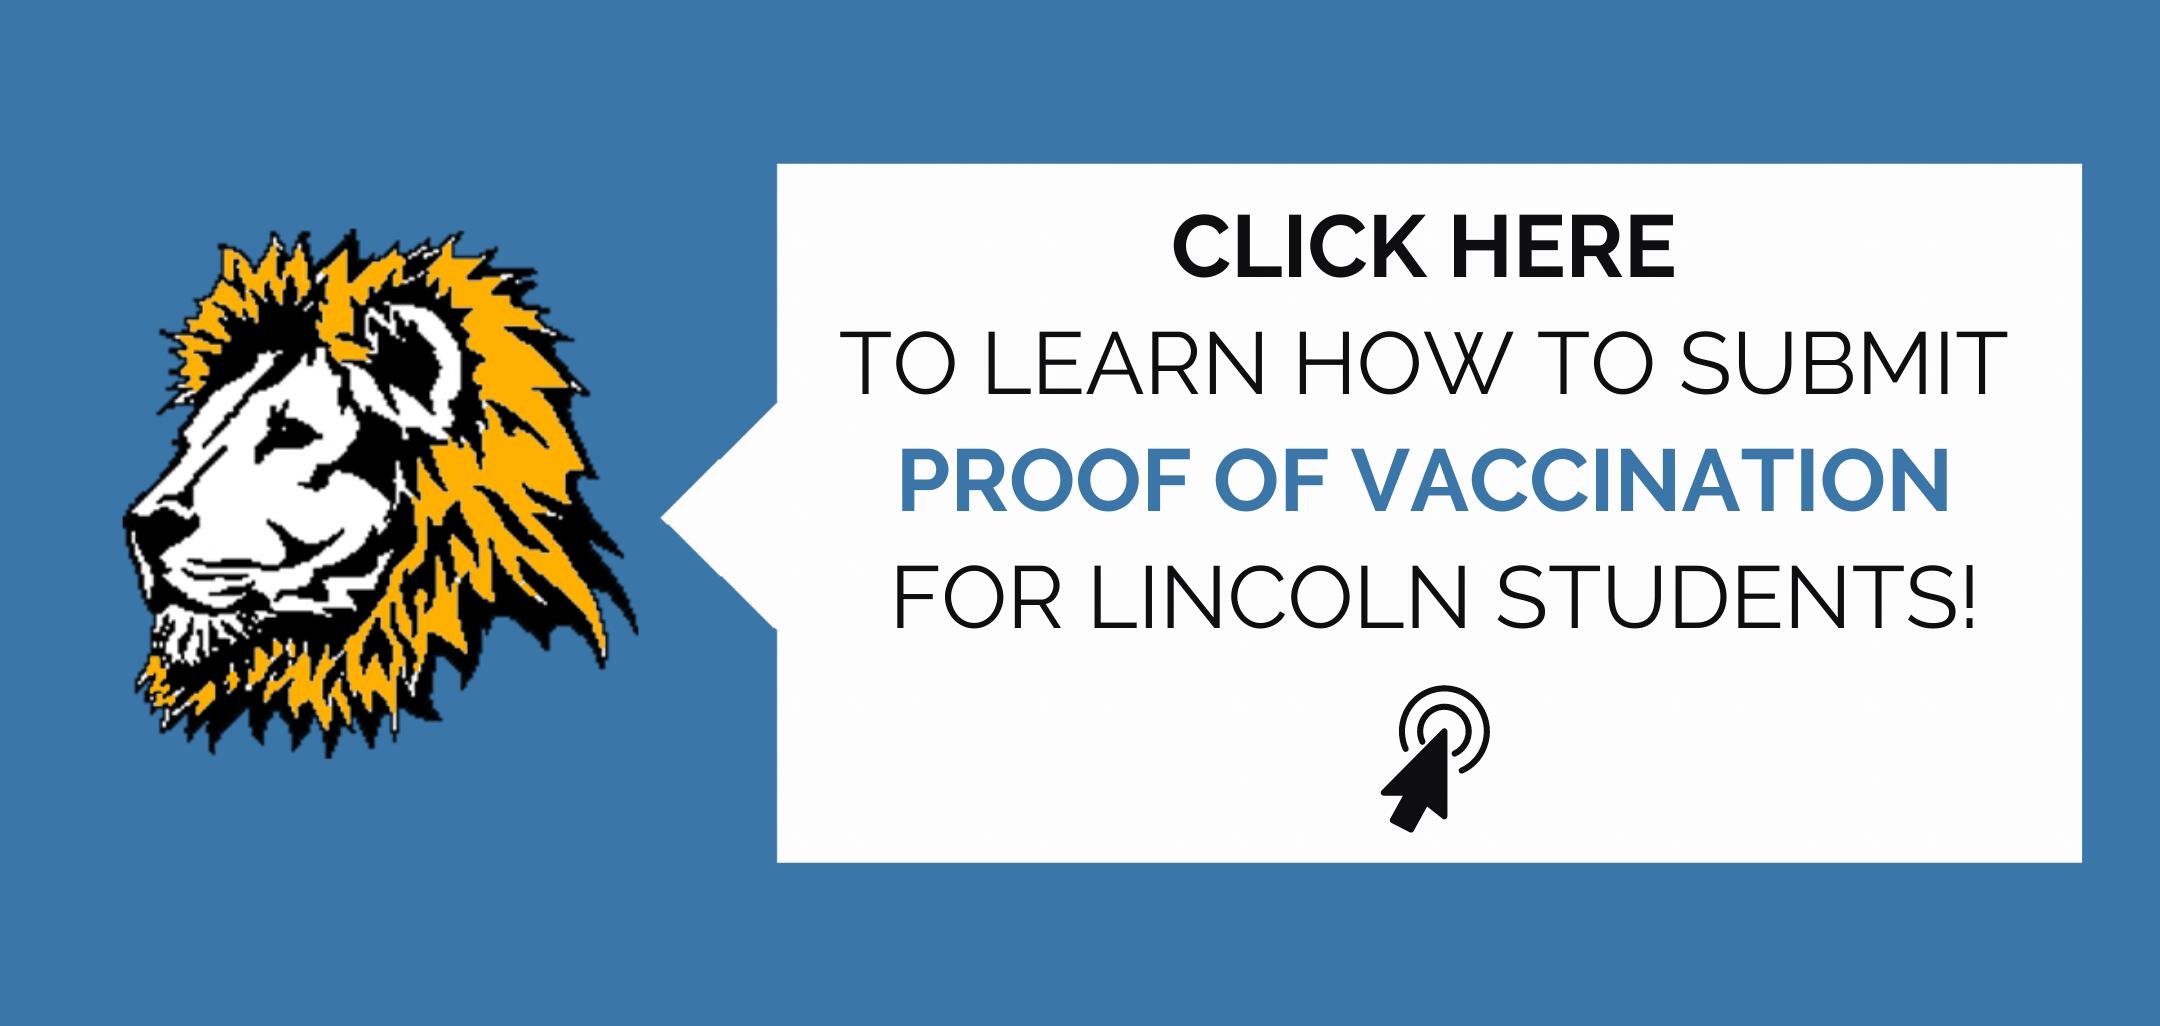 Click here to learn how to submit proof of vaccination